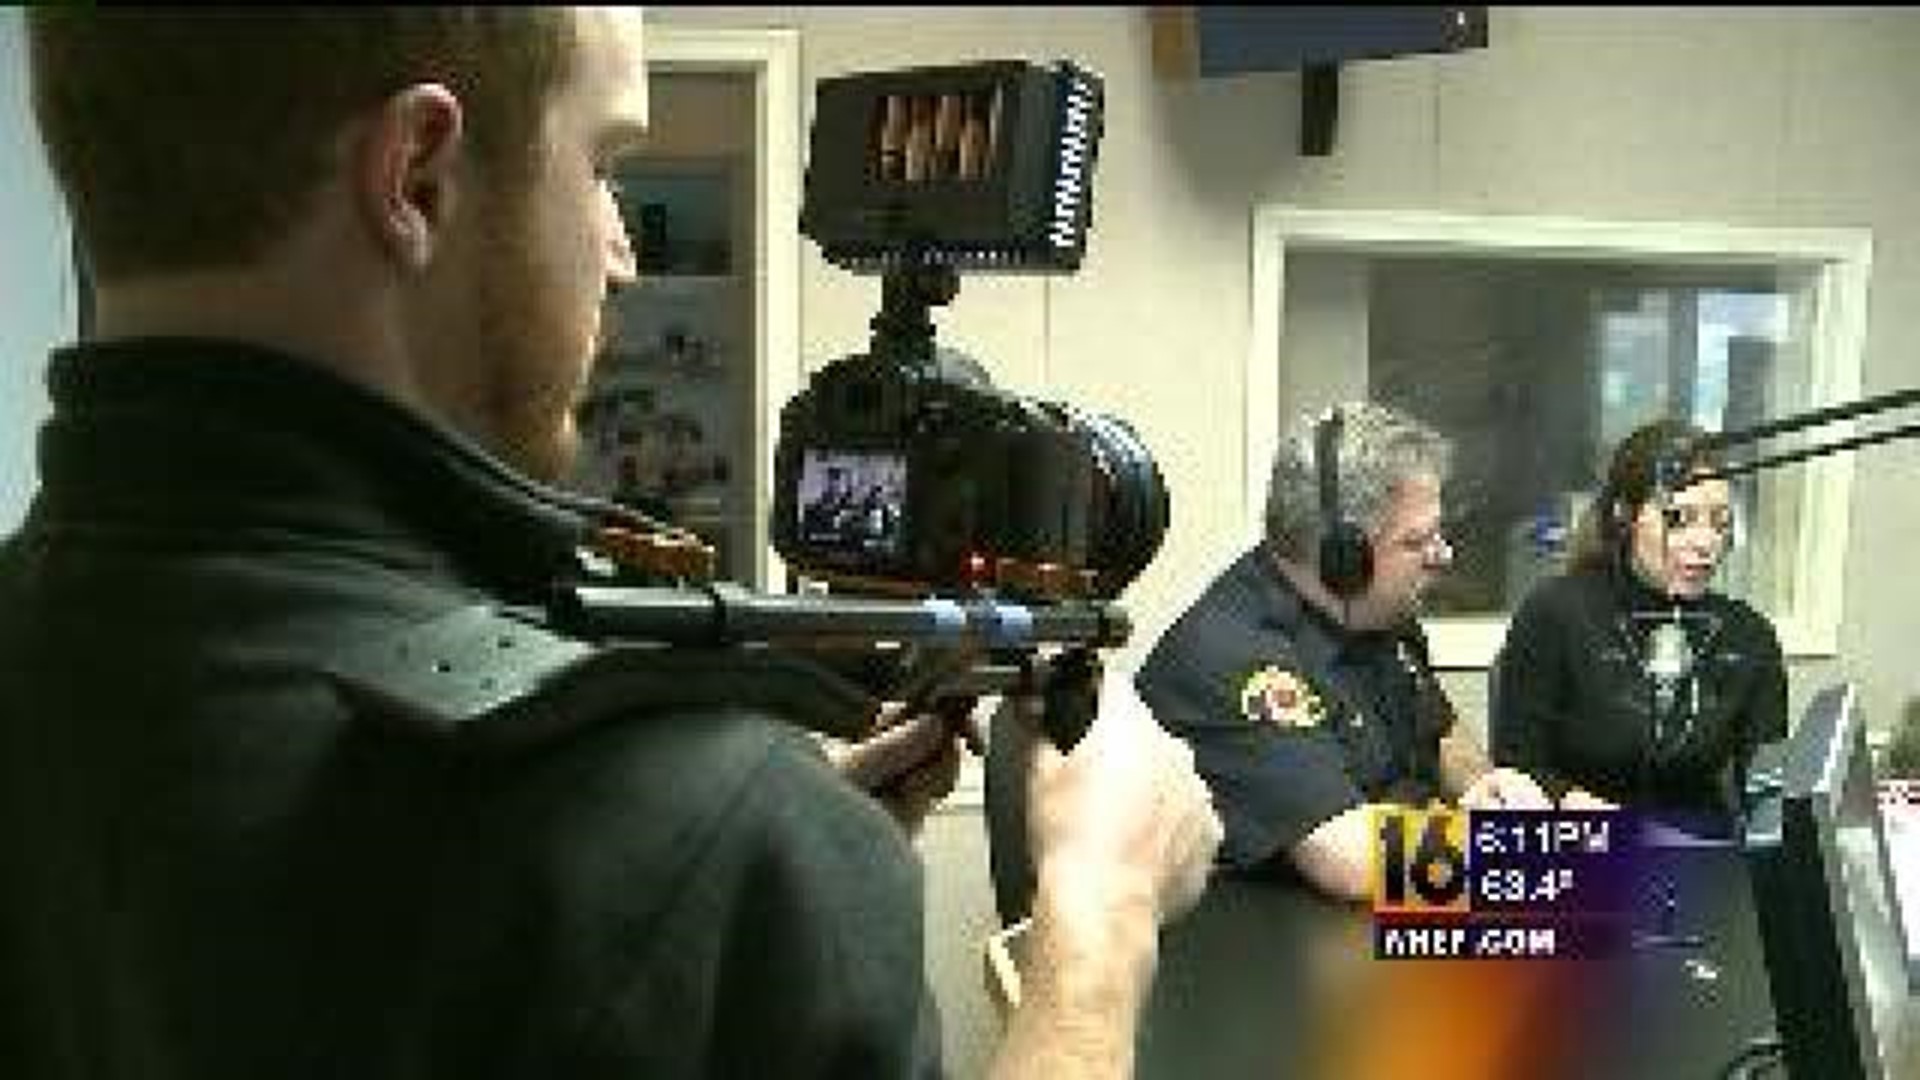 Williamsport Police Questioned for Involvement with Film